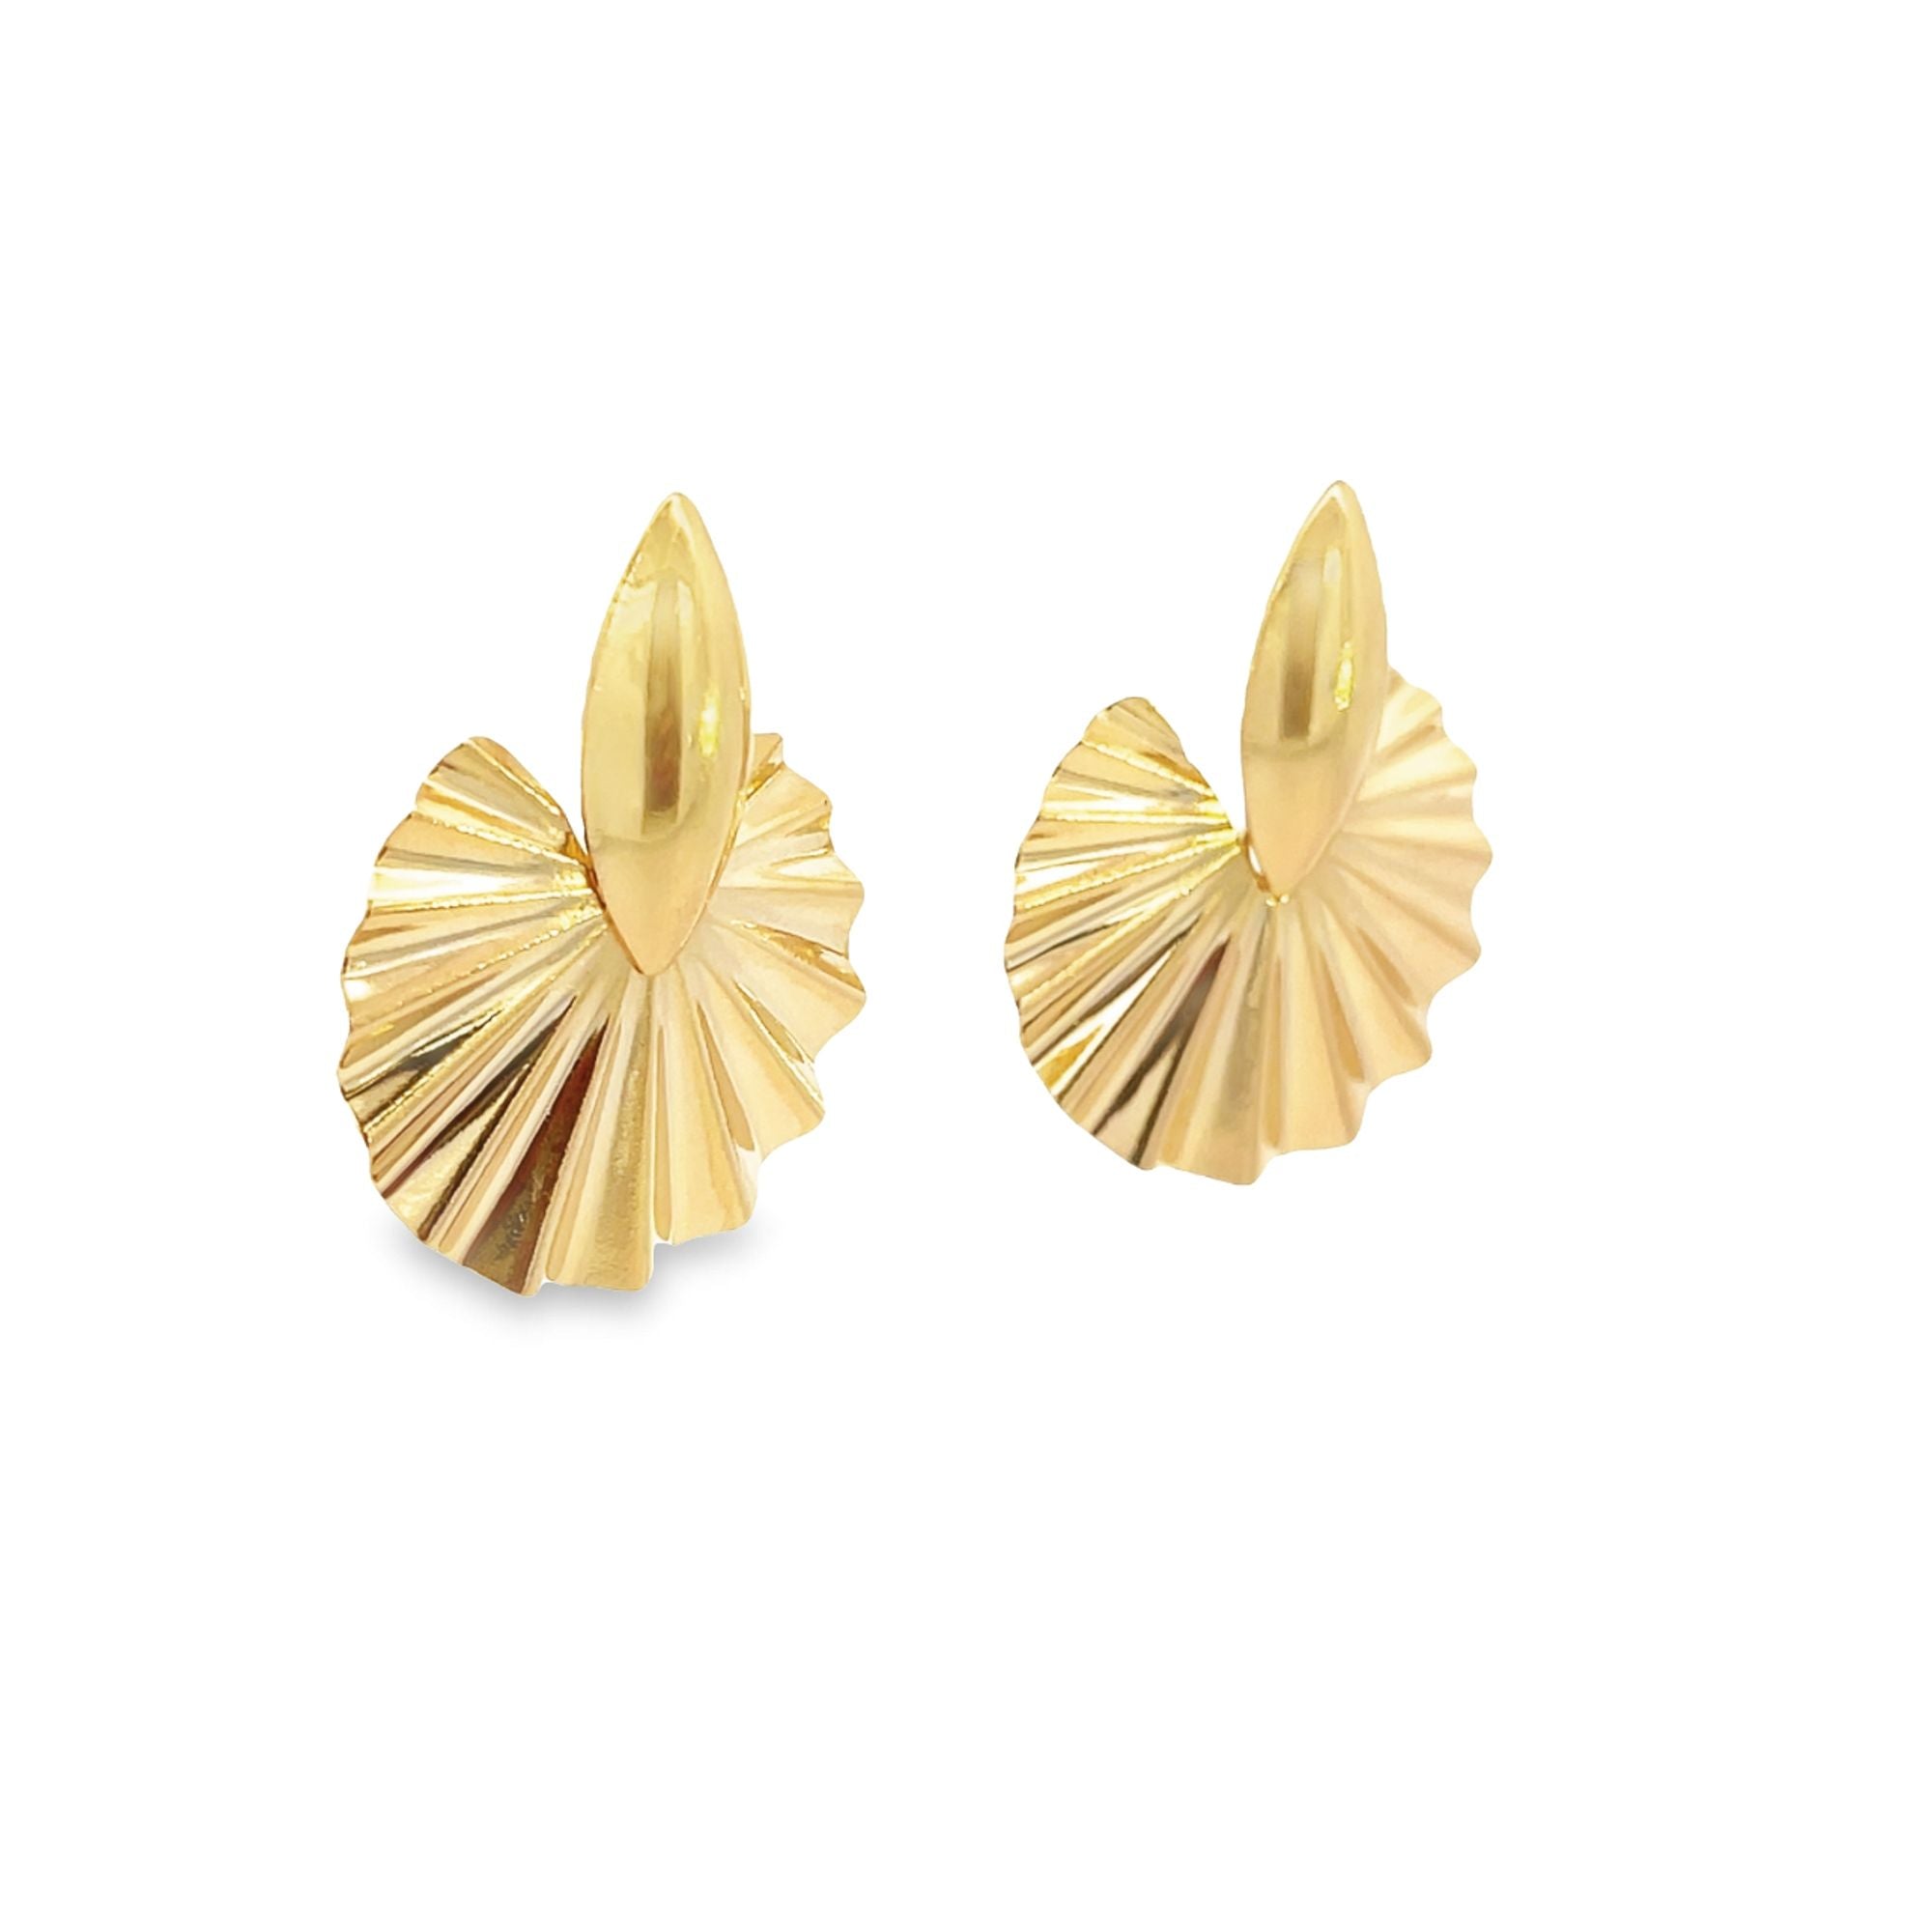 18K Gold Filled Clam Abstract Style Stud Earrings (L453)